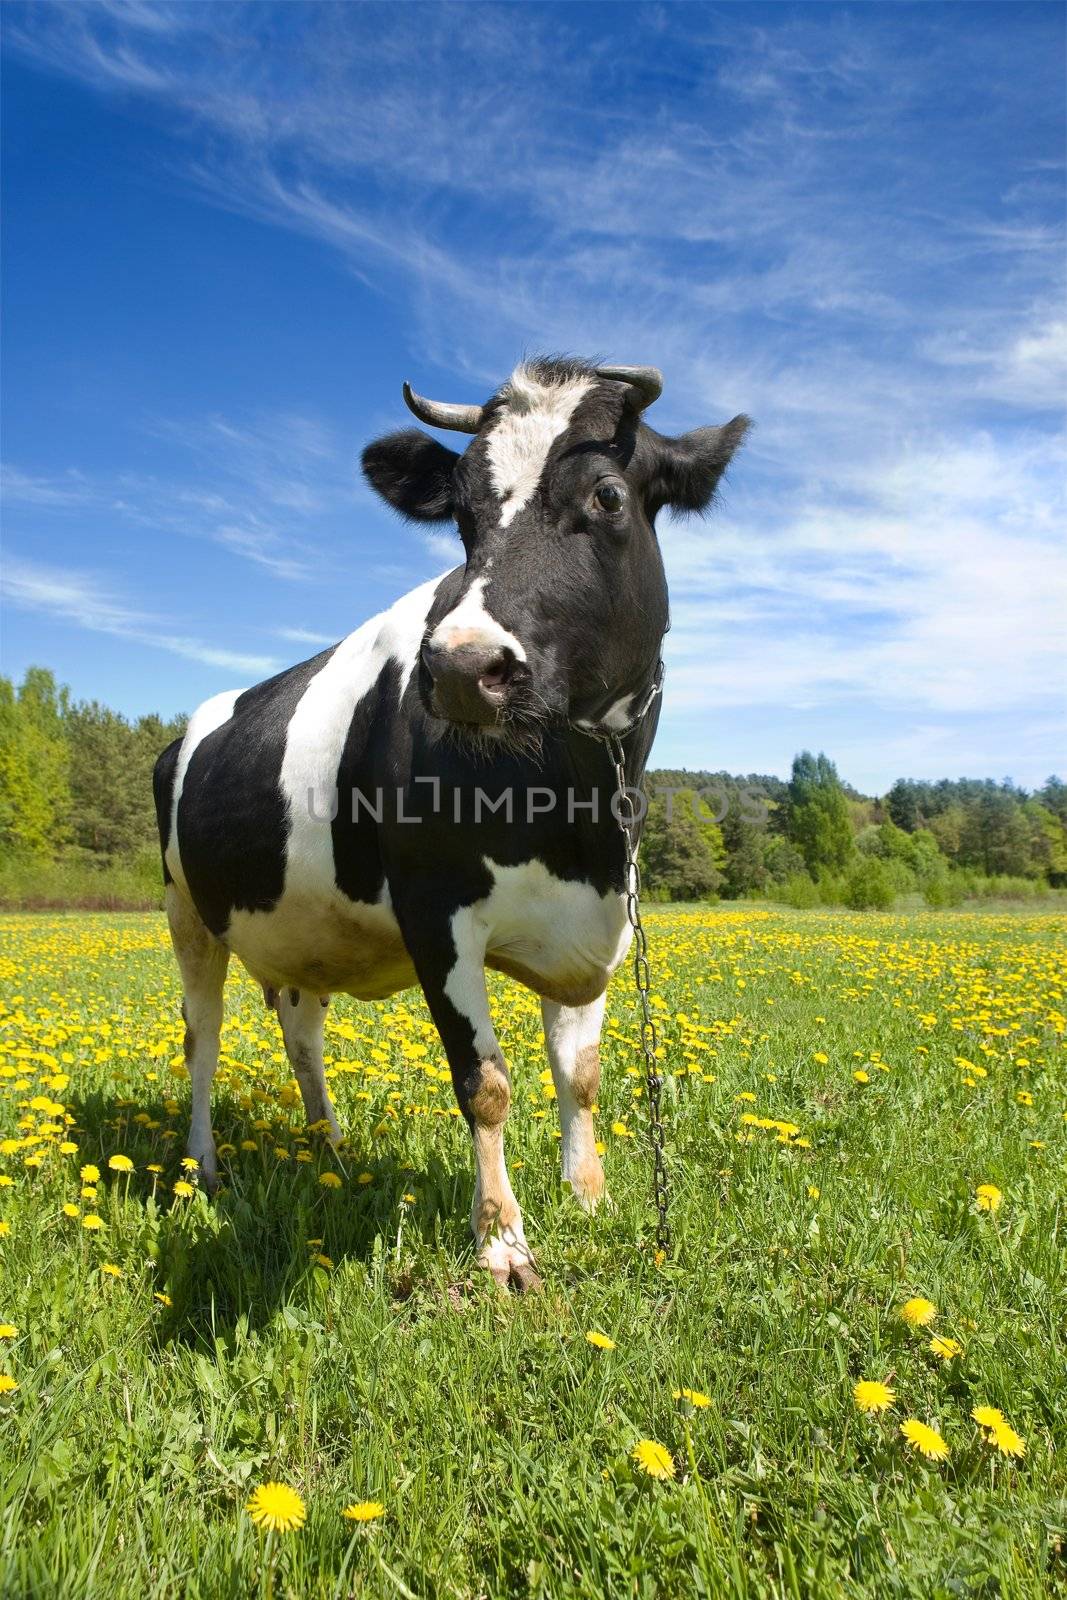 The adult black-and-white cow stands on a green grass with yellow flowers 
